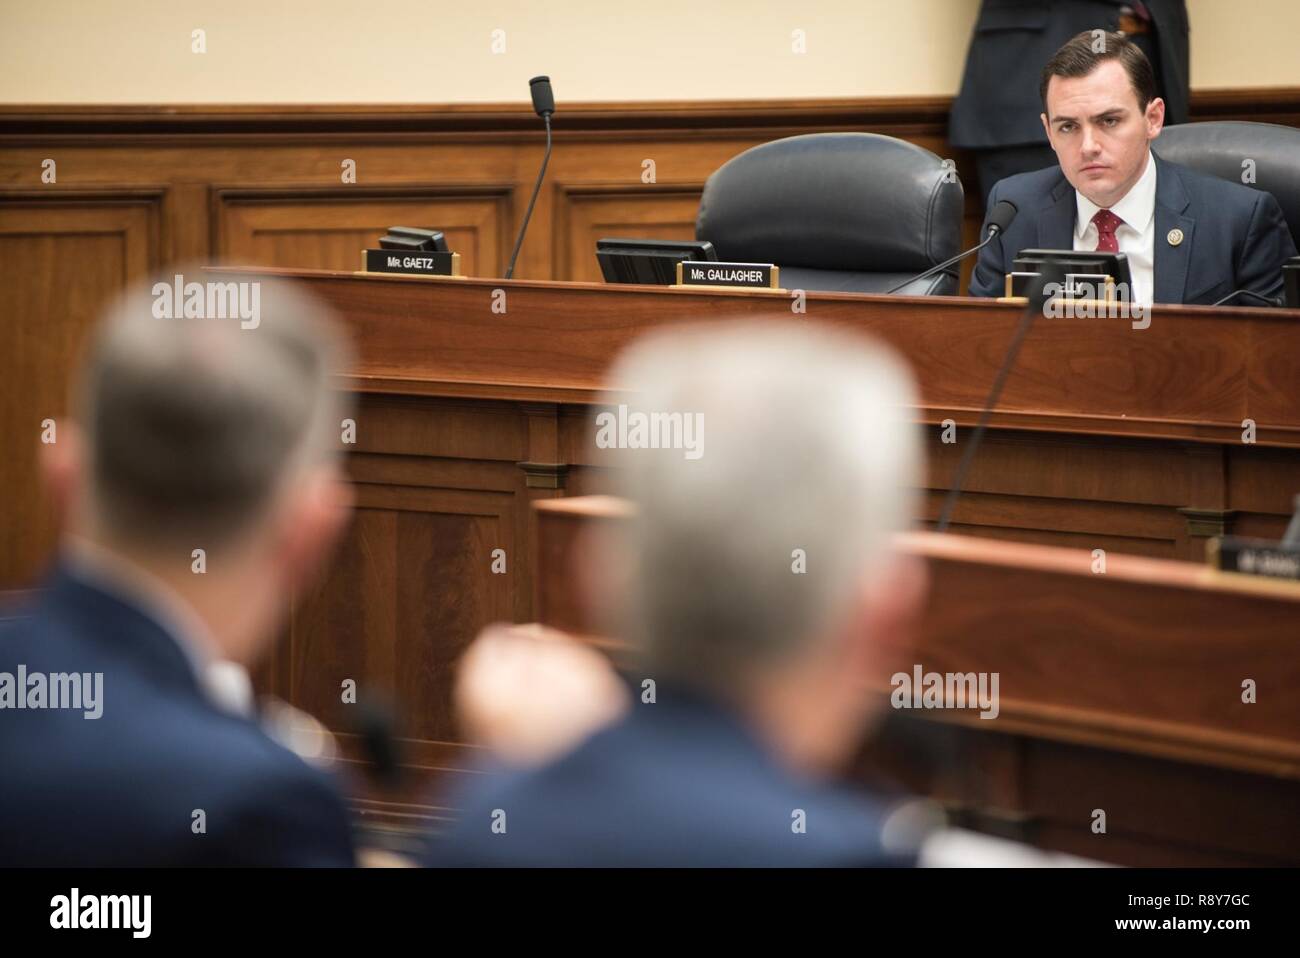 U.S. Rep. Mike Gallagher questions senior military leaders during a House Armed Services Committee hearing on Capitol Hill, March 7, 2017. U.S. Air Force Gen. Selva, Vice Chairman of the Joint Chiefs of Staff, testified alongside U.S. Air Force Gen. John E. Hyten, commander of U.S. Strategic Command; U.S. Navy Adm. Bill Moran, Vice Chief of Naval Operations; and U.S. Air Force Vice Chief of Staff Gen. Stephen Wilson. They spoke about the continuing relevance of U.S. nuclear forces for our national security and the steps the Joint Force is taking to modernize and replace them. He also stated th Stock Photo